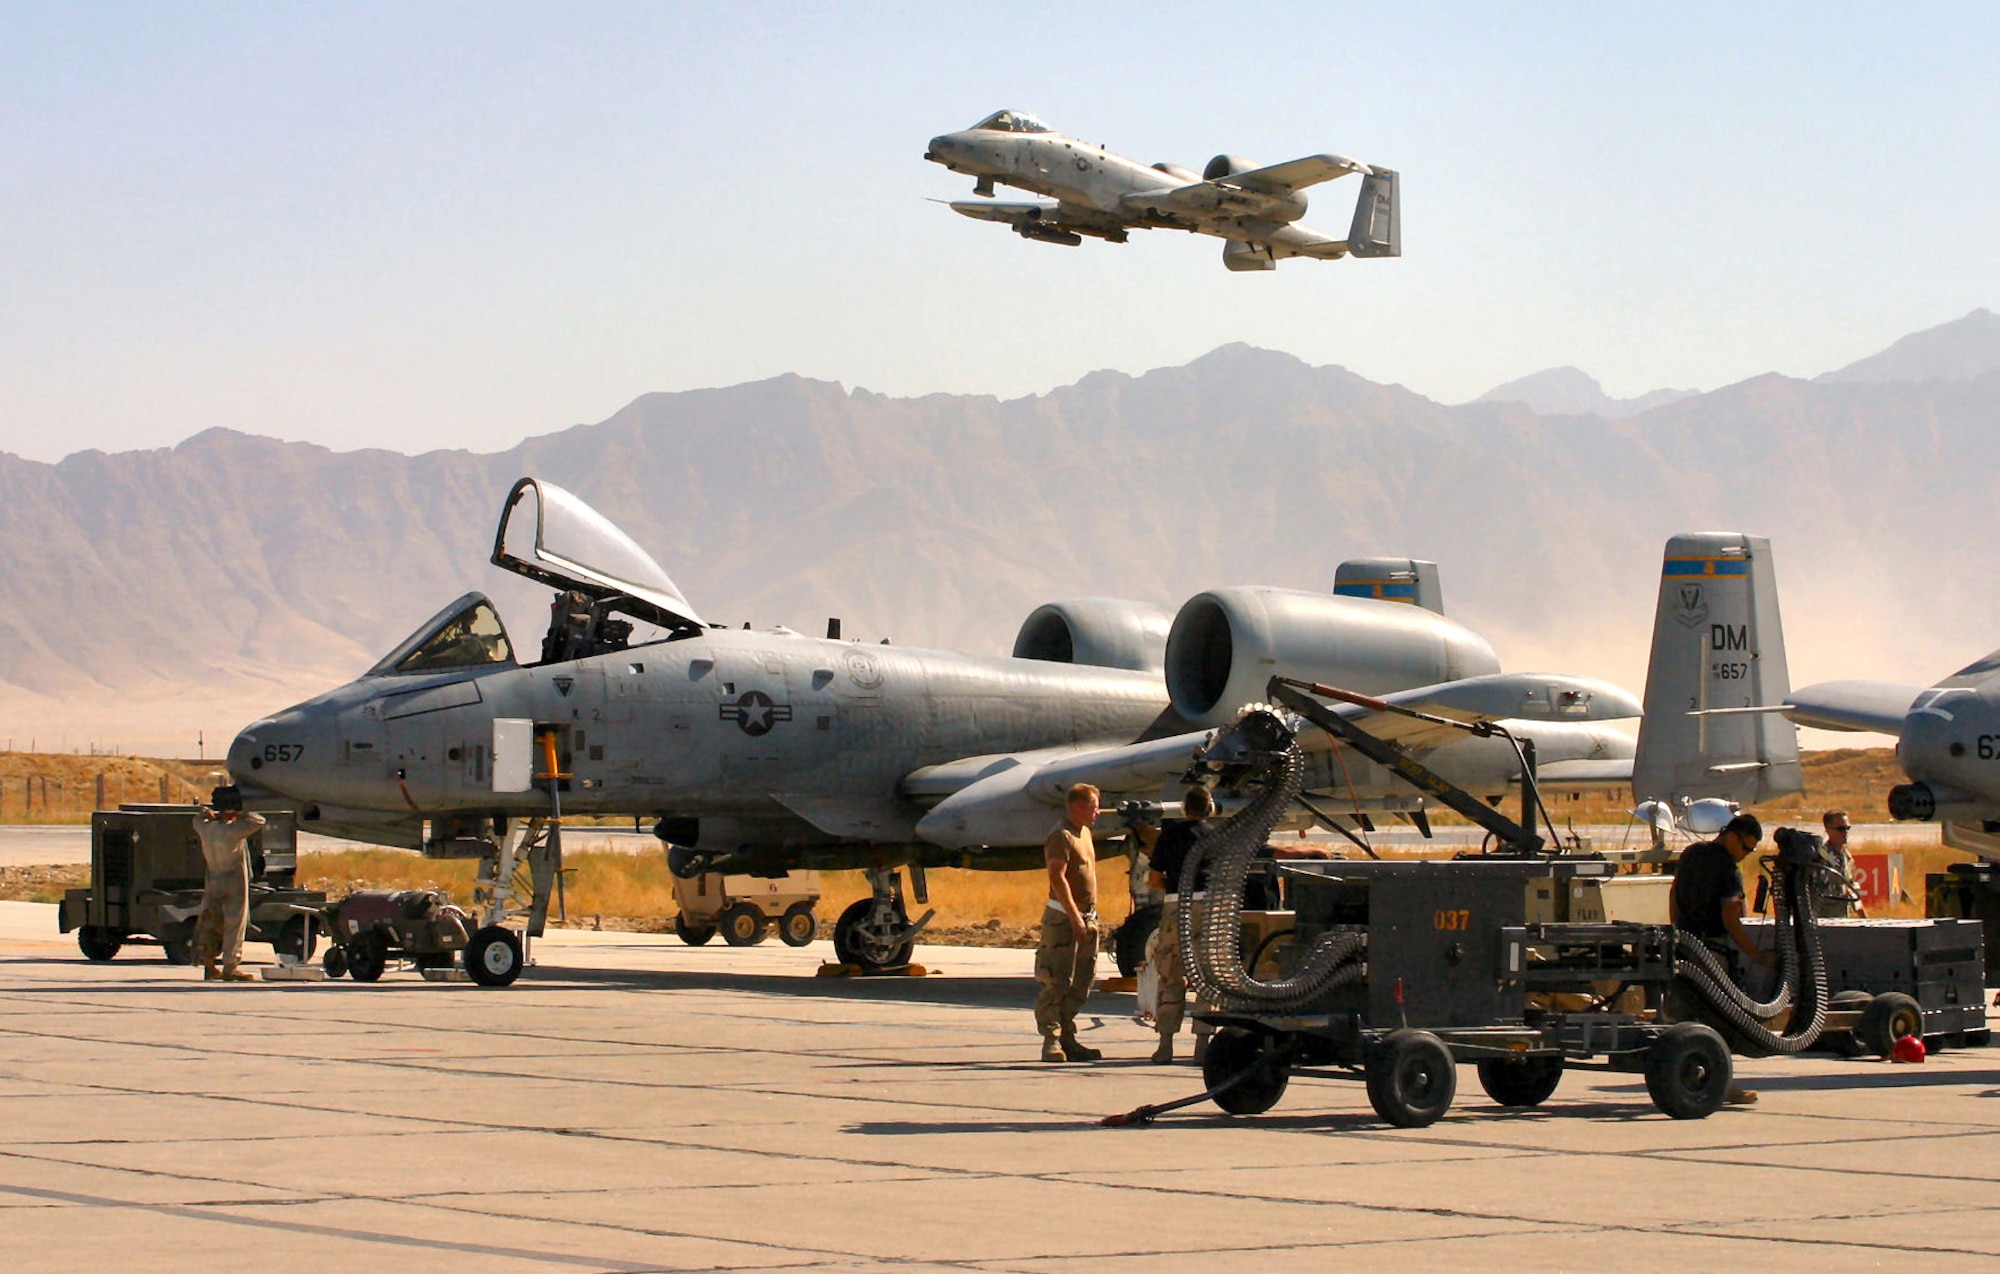 BAGRAM AIR BASE, Afghanistan (AFPN) -- An A-10 Thunderbolt II takes off on a combat mission as A-10 crew chiefs, weapons loaders and an avionics specialist ready others for another mission. Since Sept. 15, A-10s here have flown more than 1,700 combat sorties, totaling more than 6,000 combat hours in support of Operation Enduring Freedom. The A-10 was the first Air Force aircraft specially designed for close air support of ground forces. (U.S. Air Force photo by Chief Master Sgt. David L. Stuppy) 